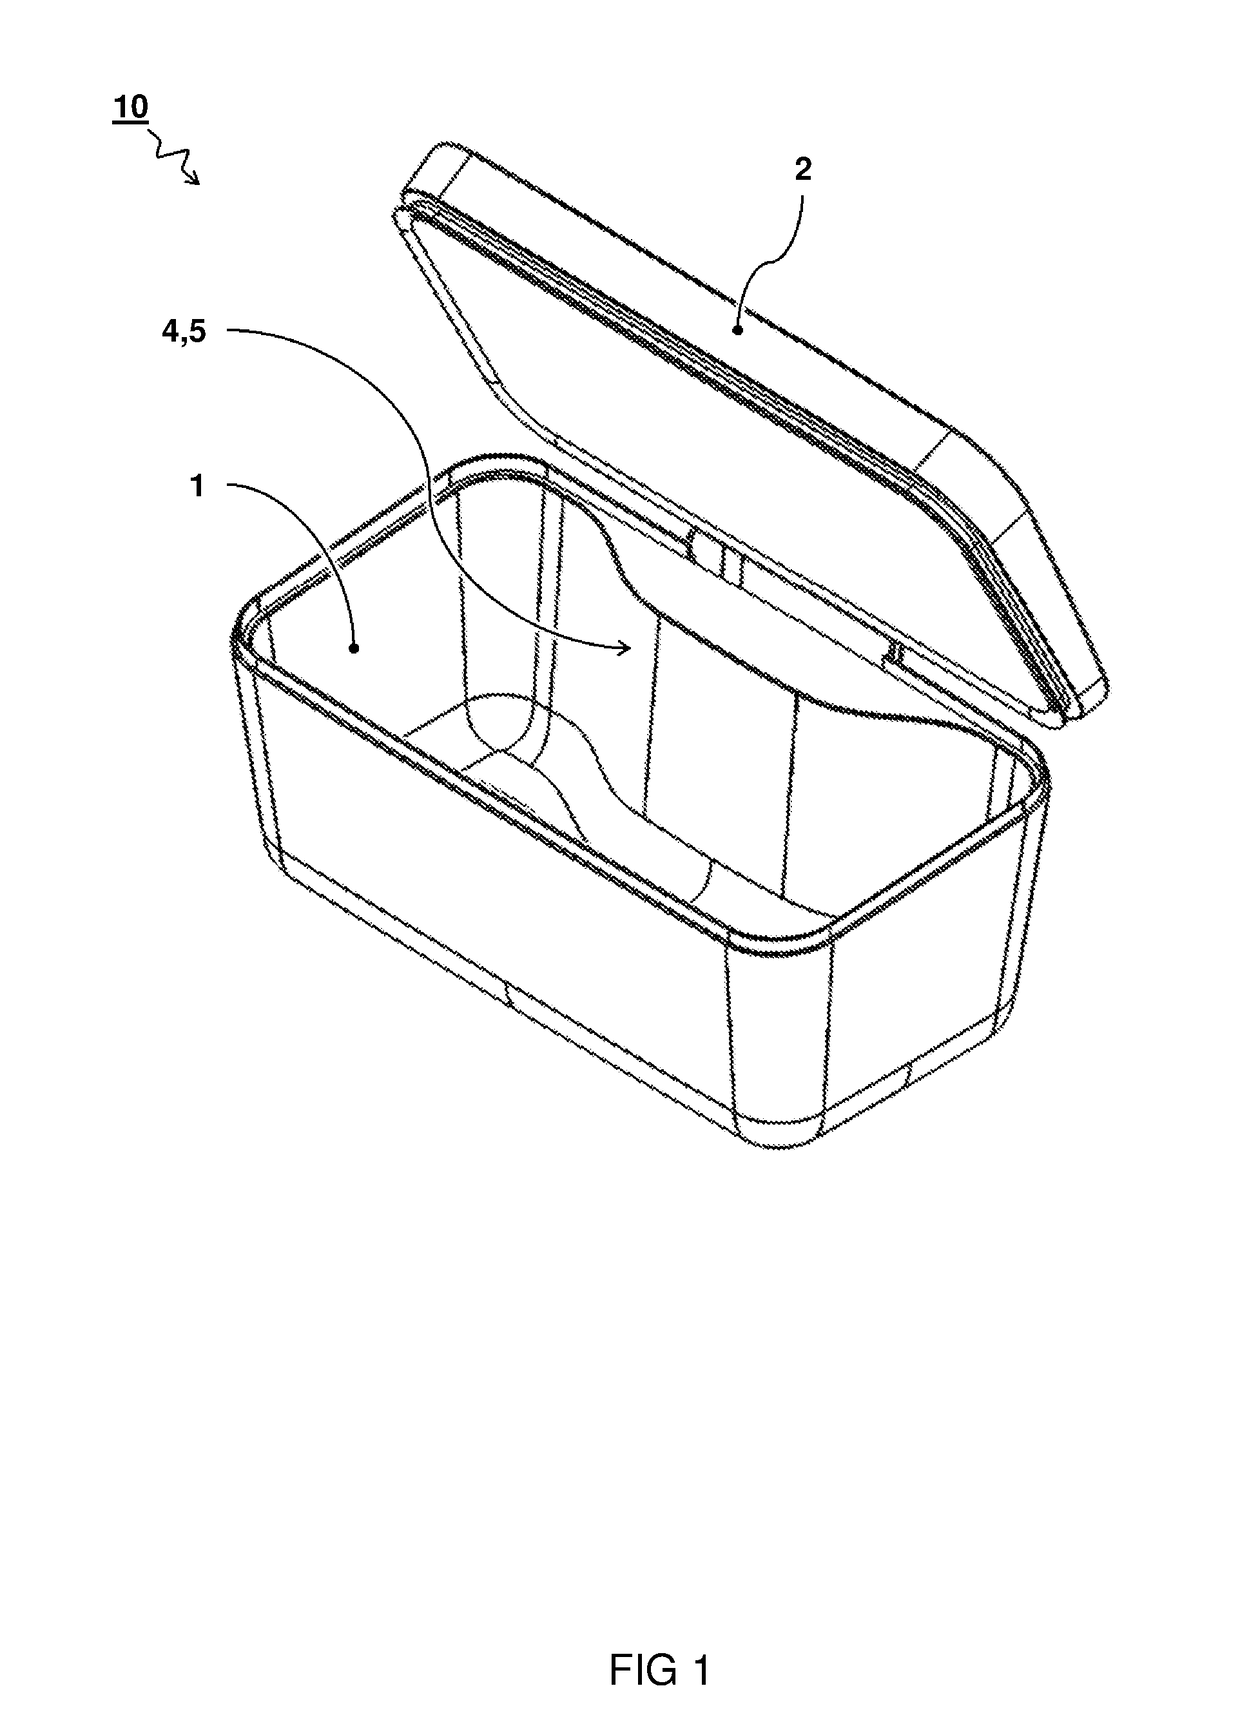 Container for delaying spoilage of a consumable product and methods for using the container